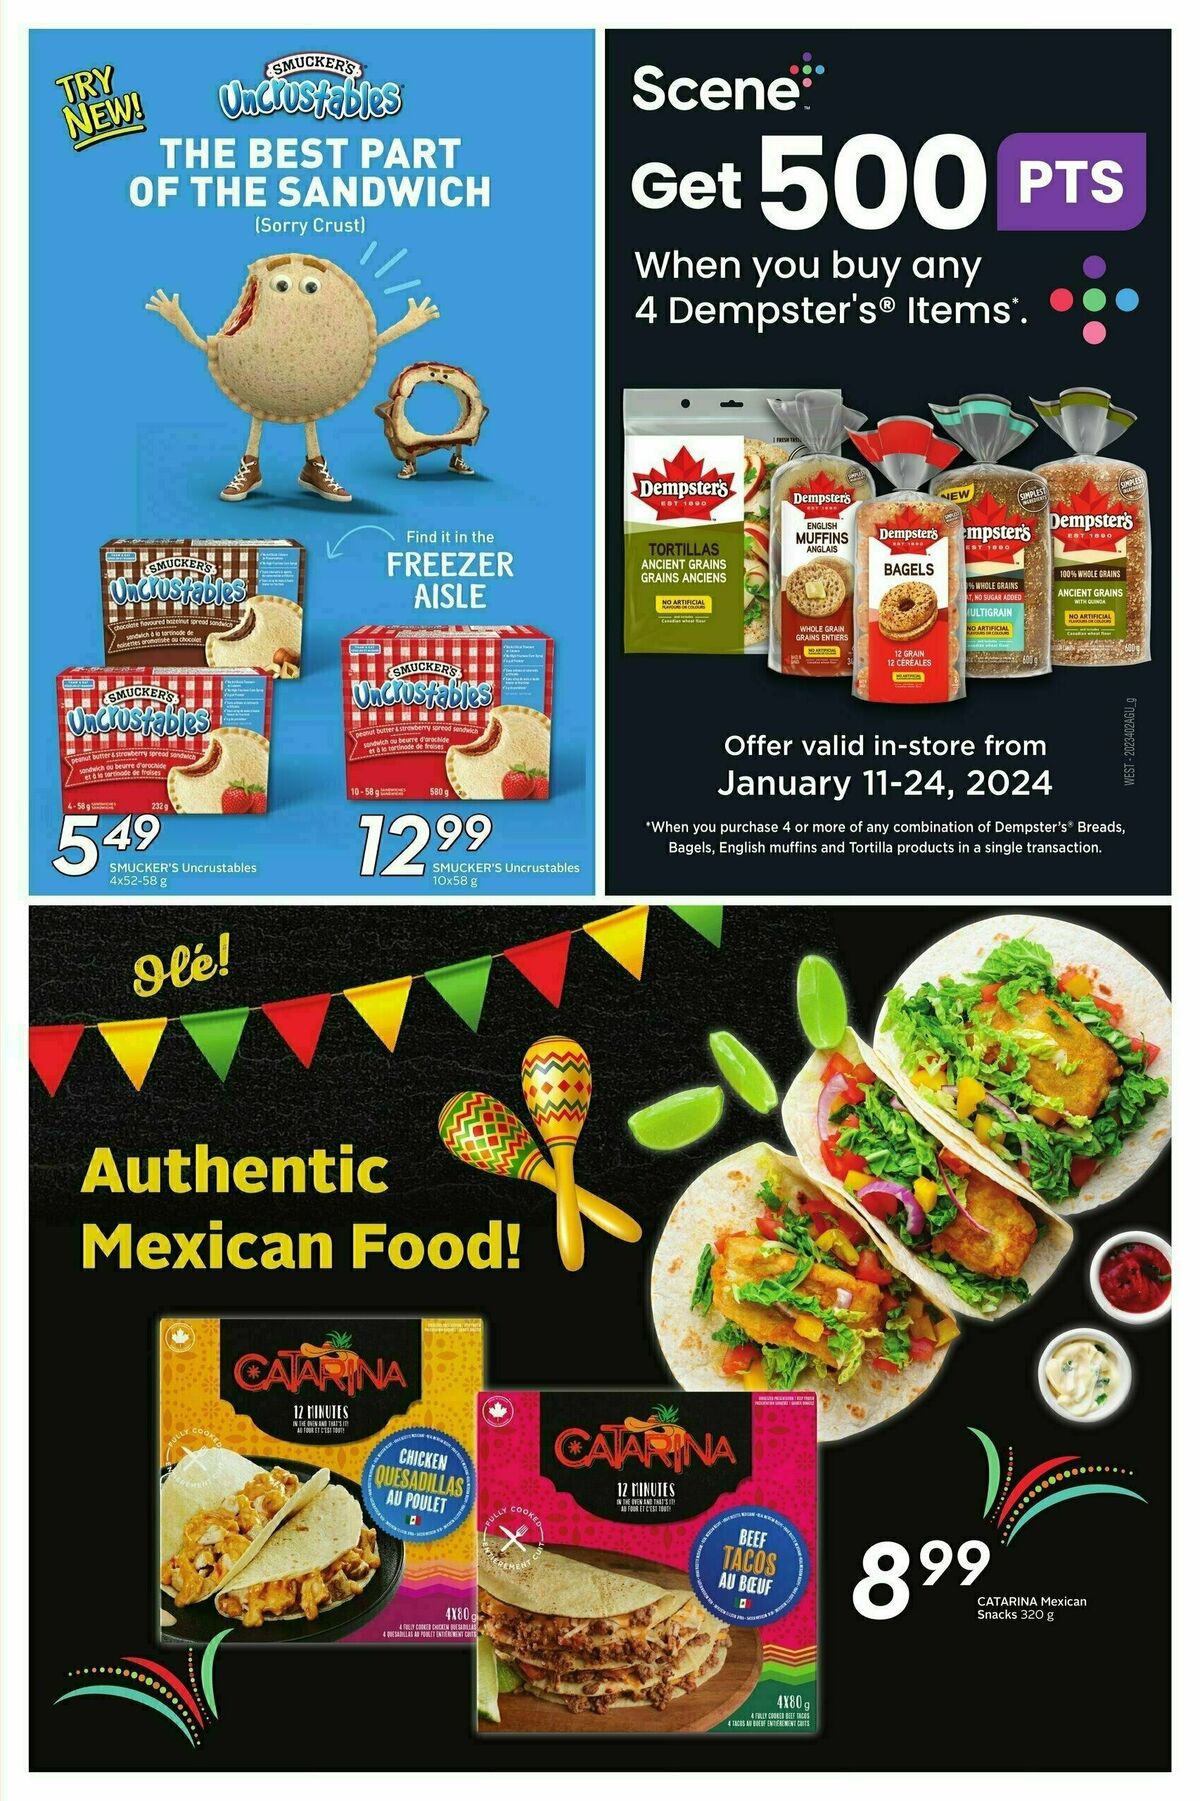 Safeway Flyer from January 11